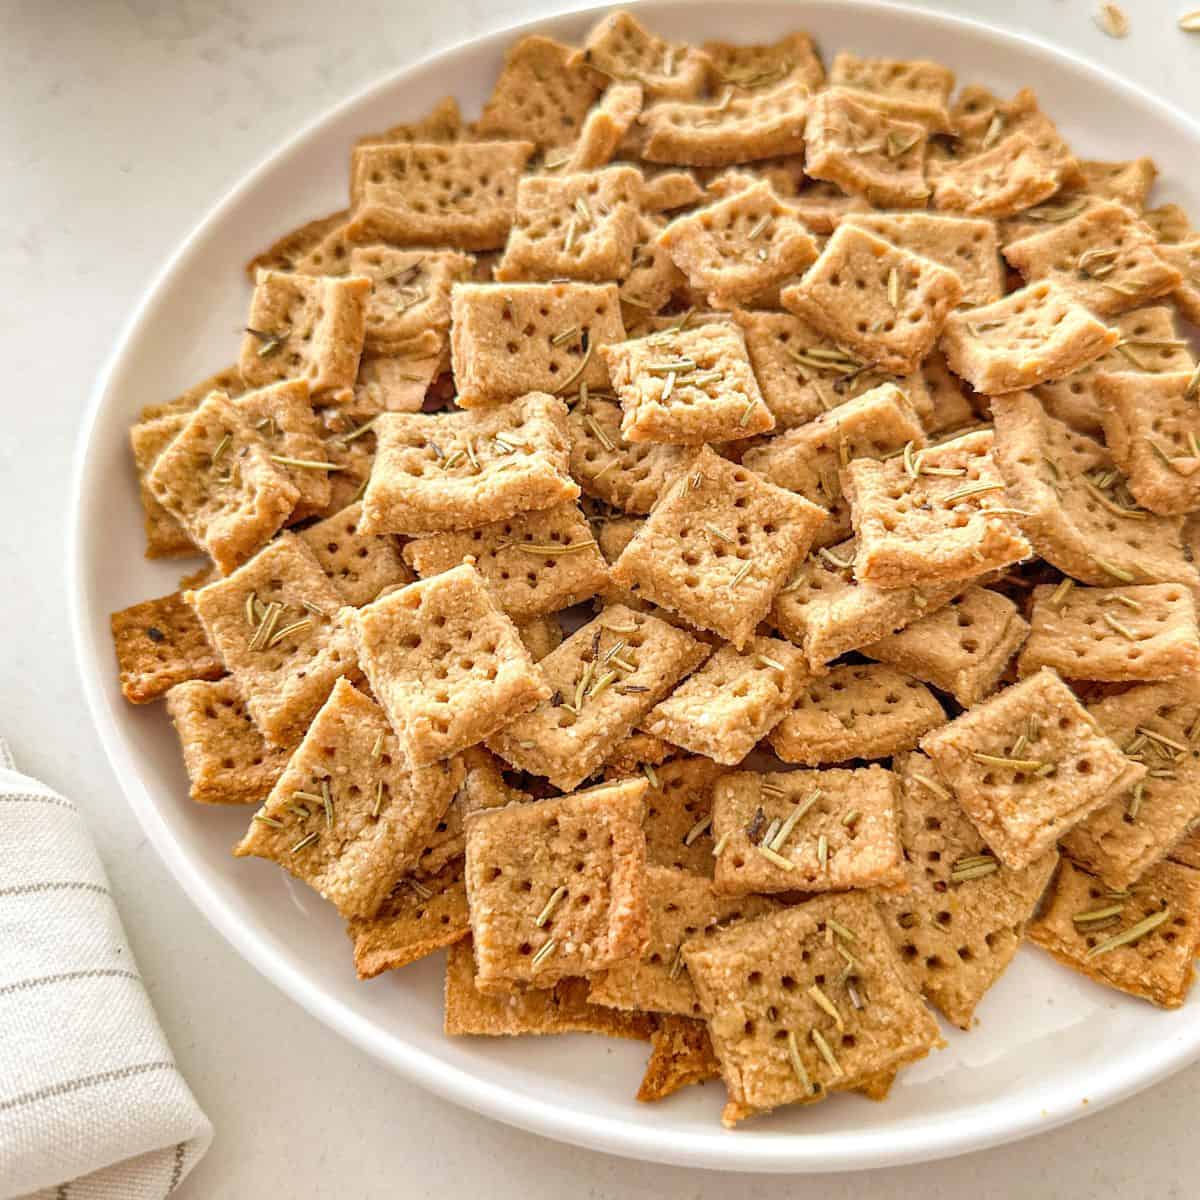 Protein crackers with rosemary on top in white plate.